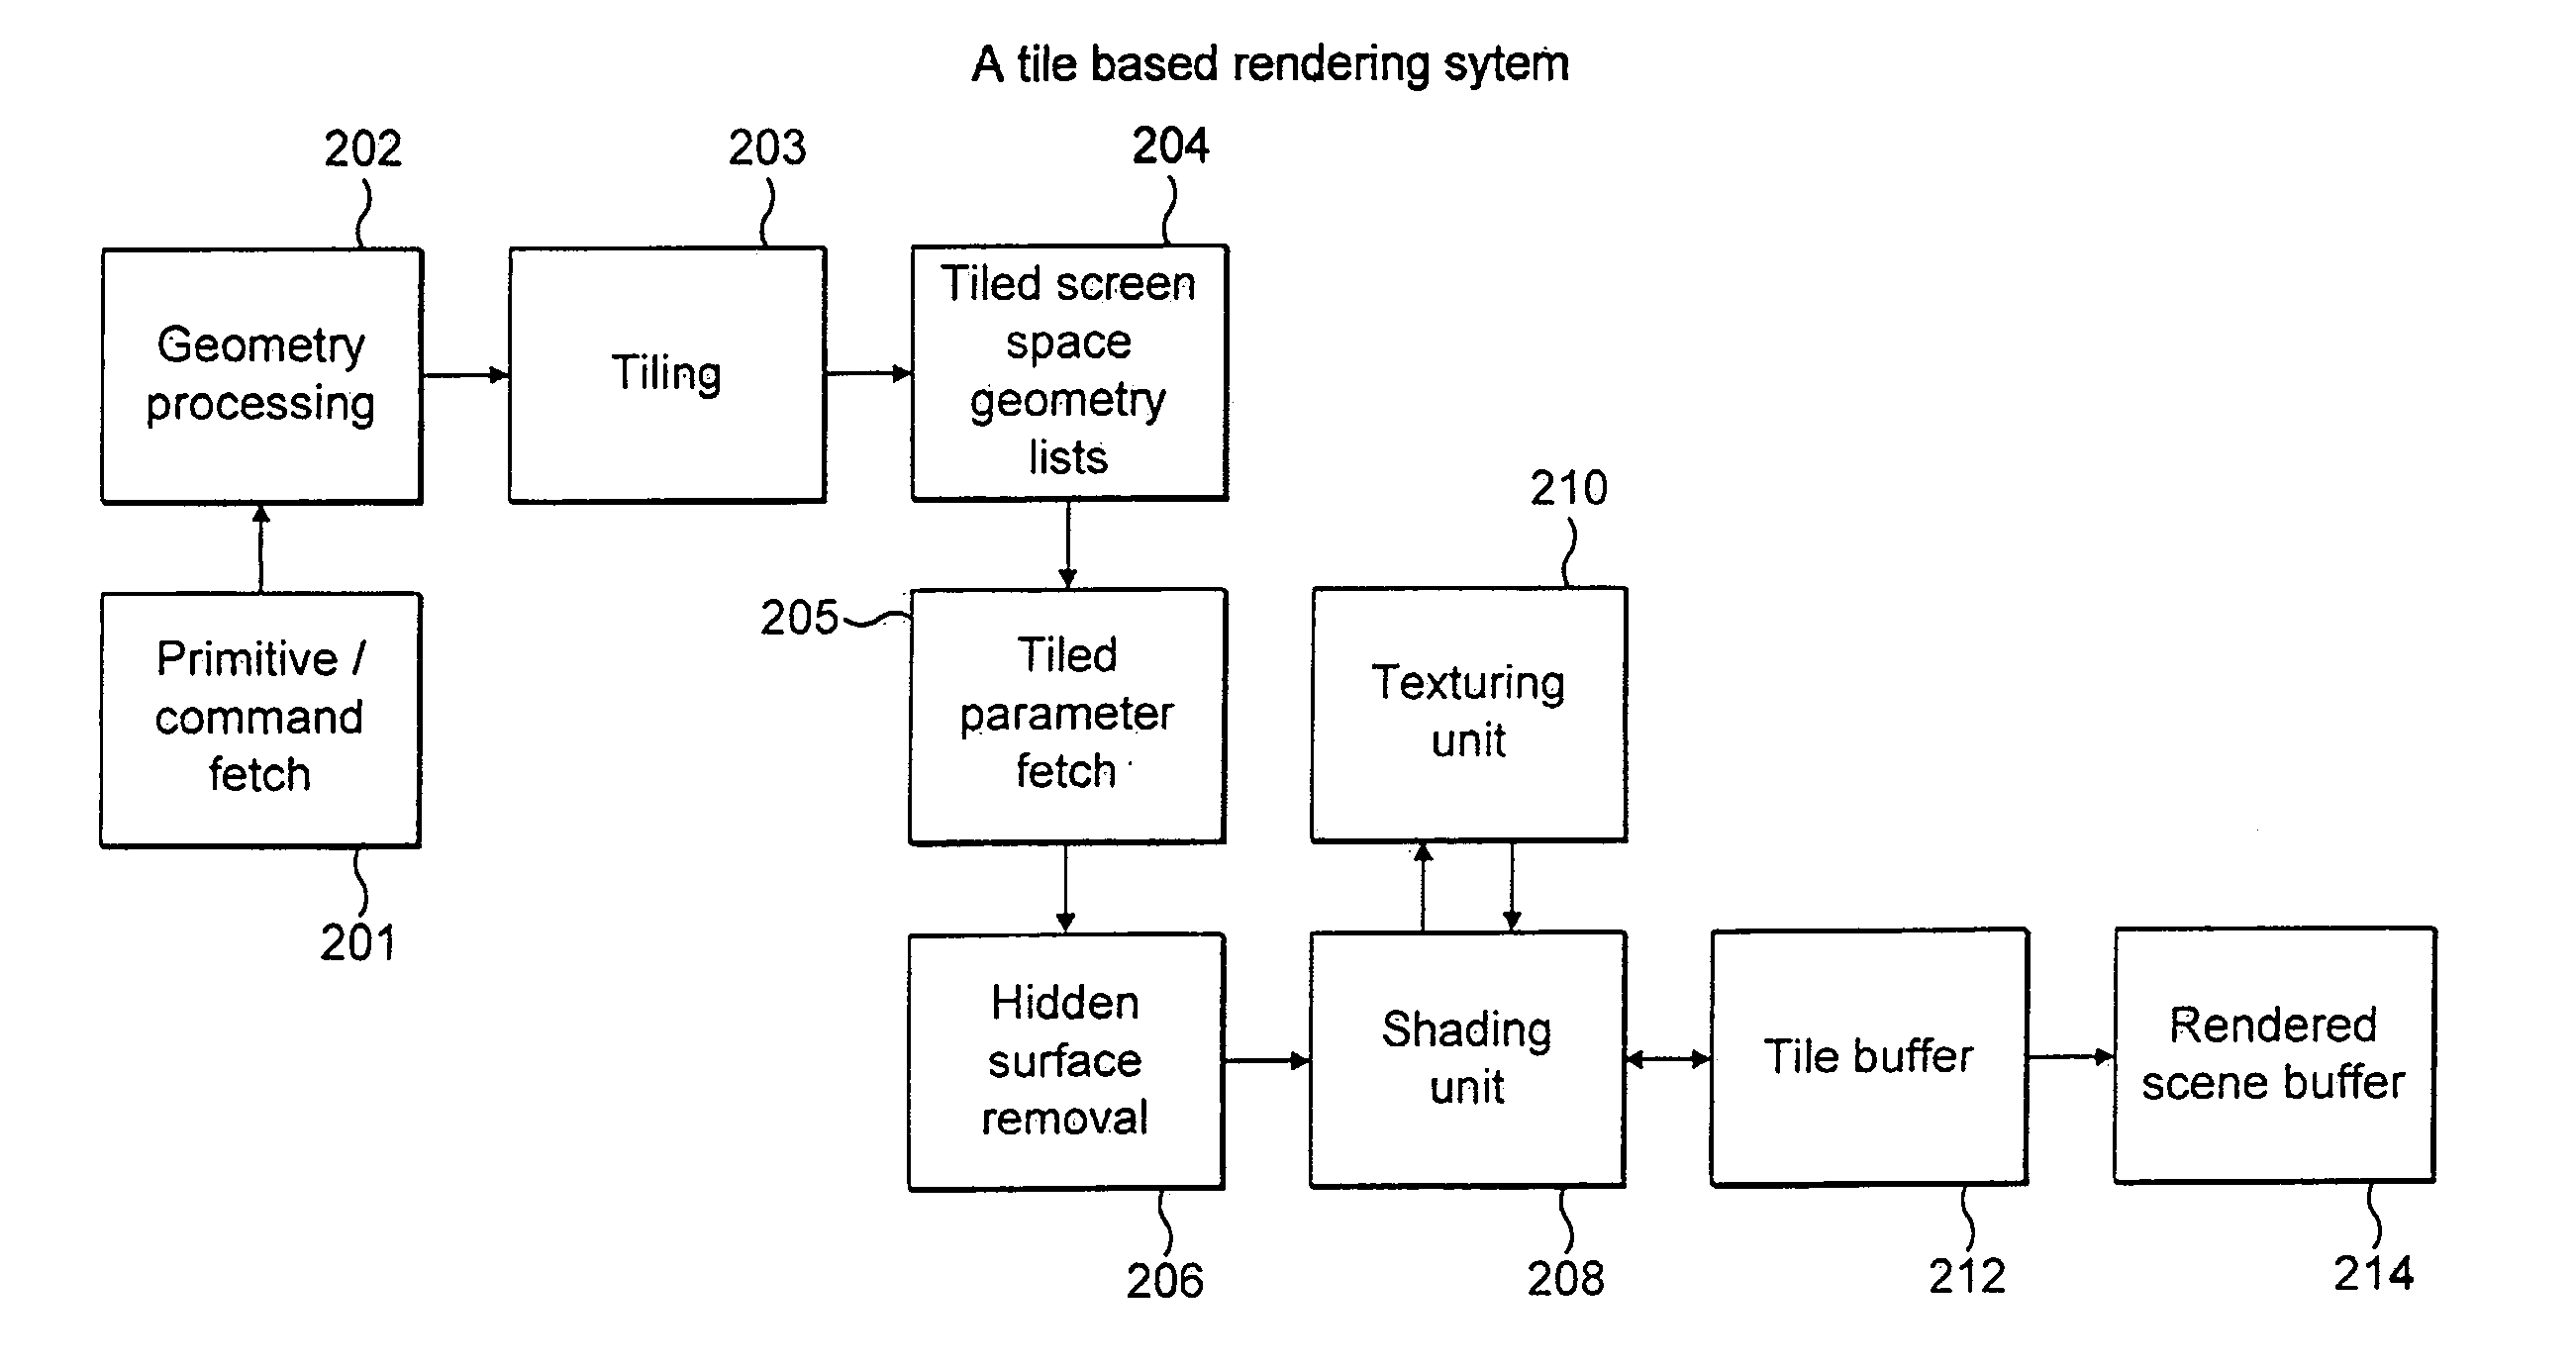 Demand based texture rendering in a tile based rendering system